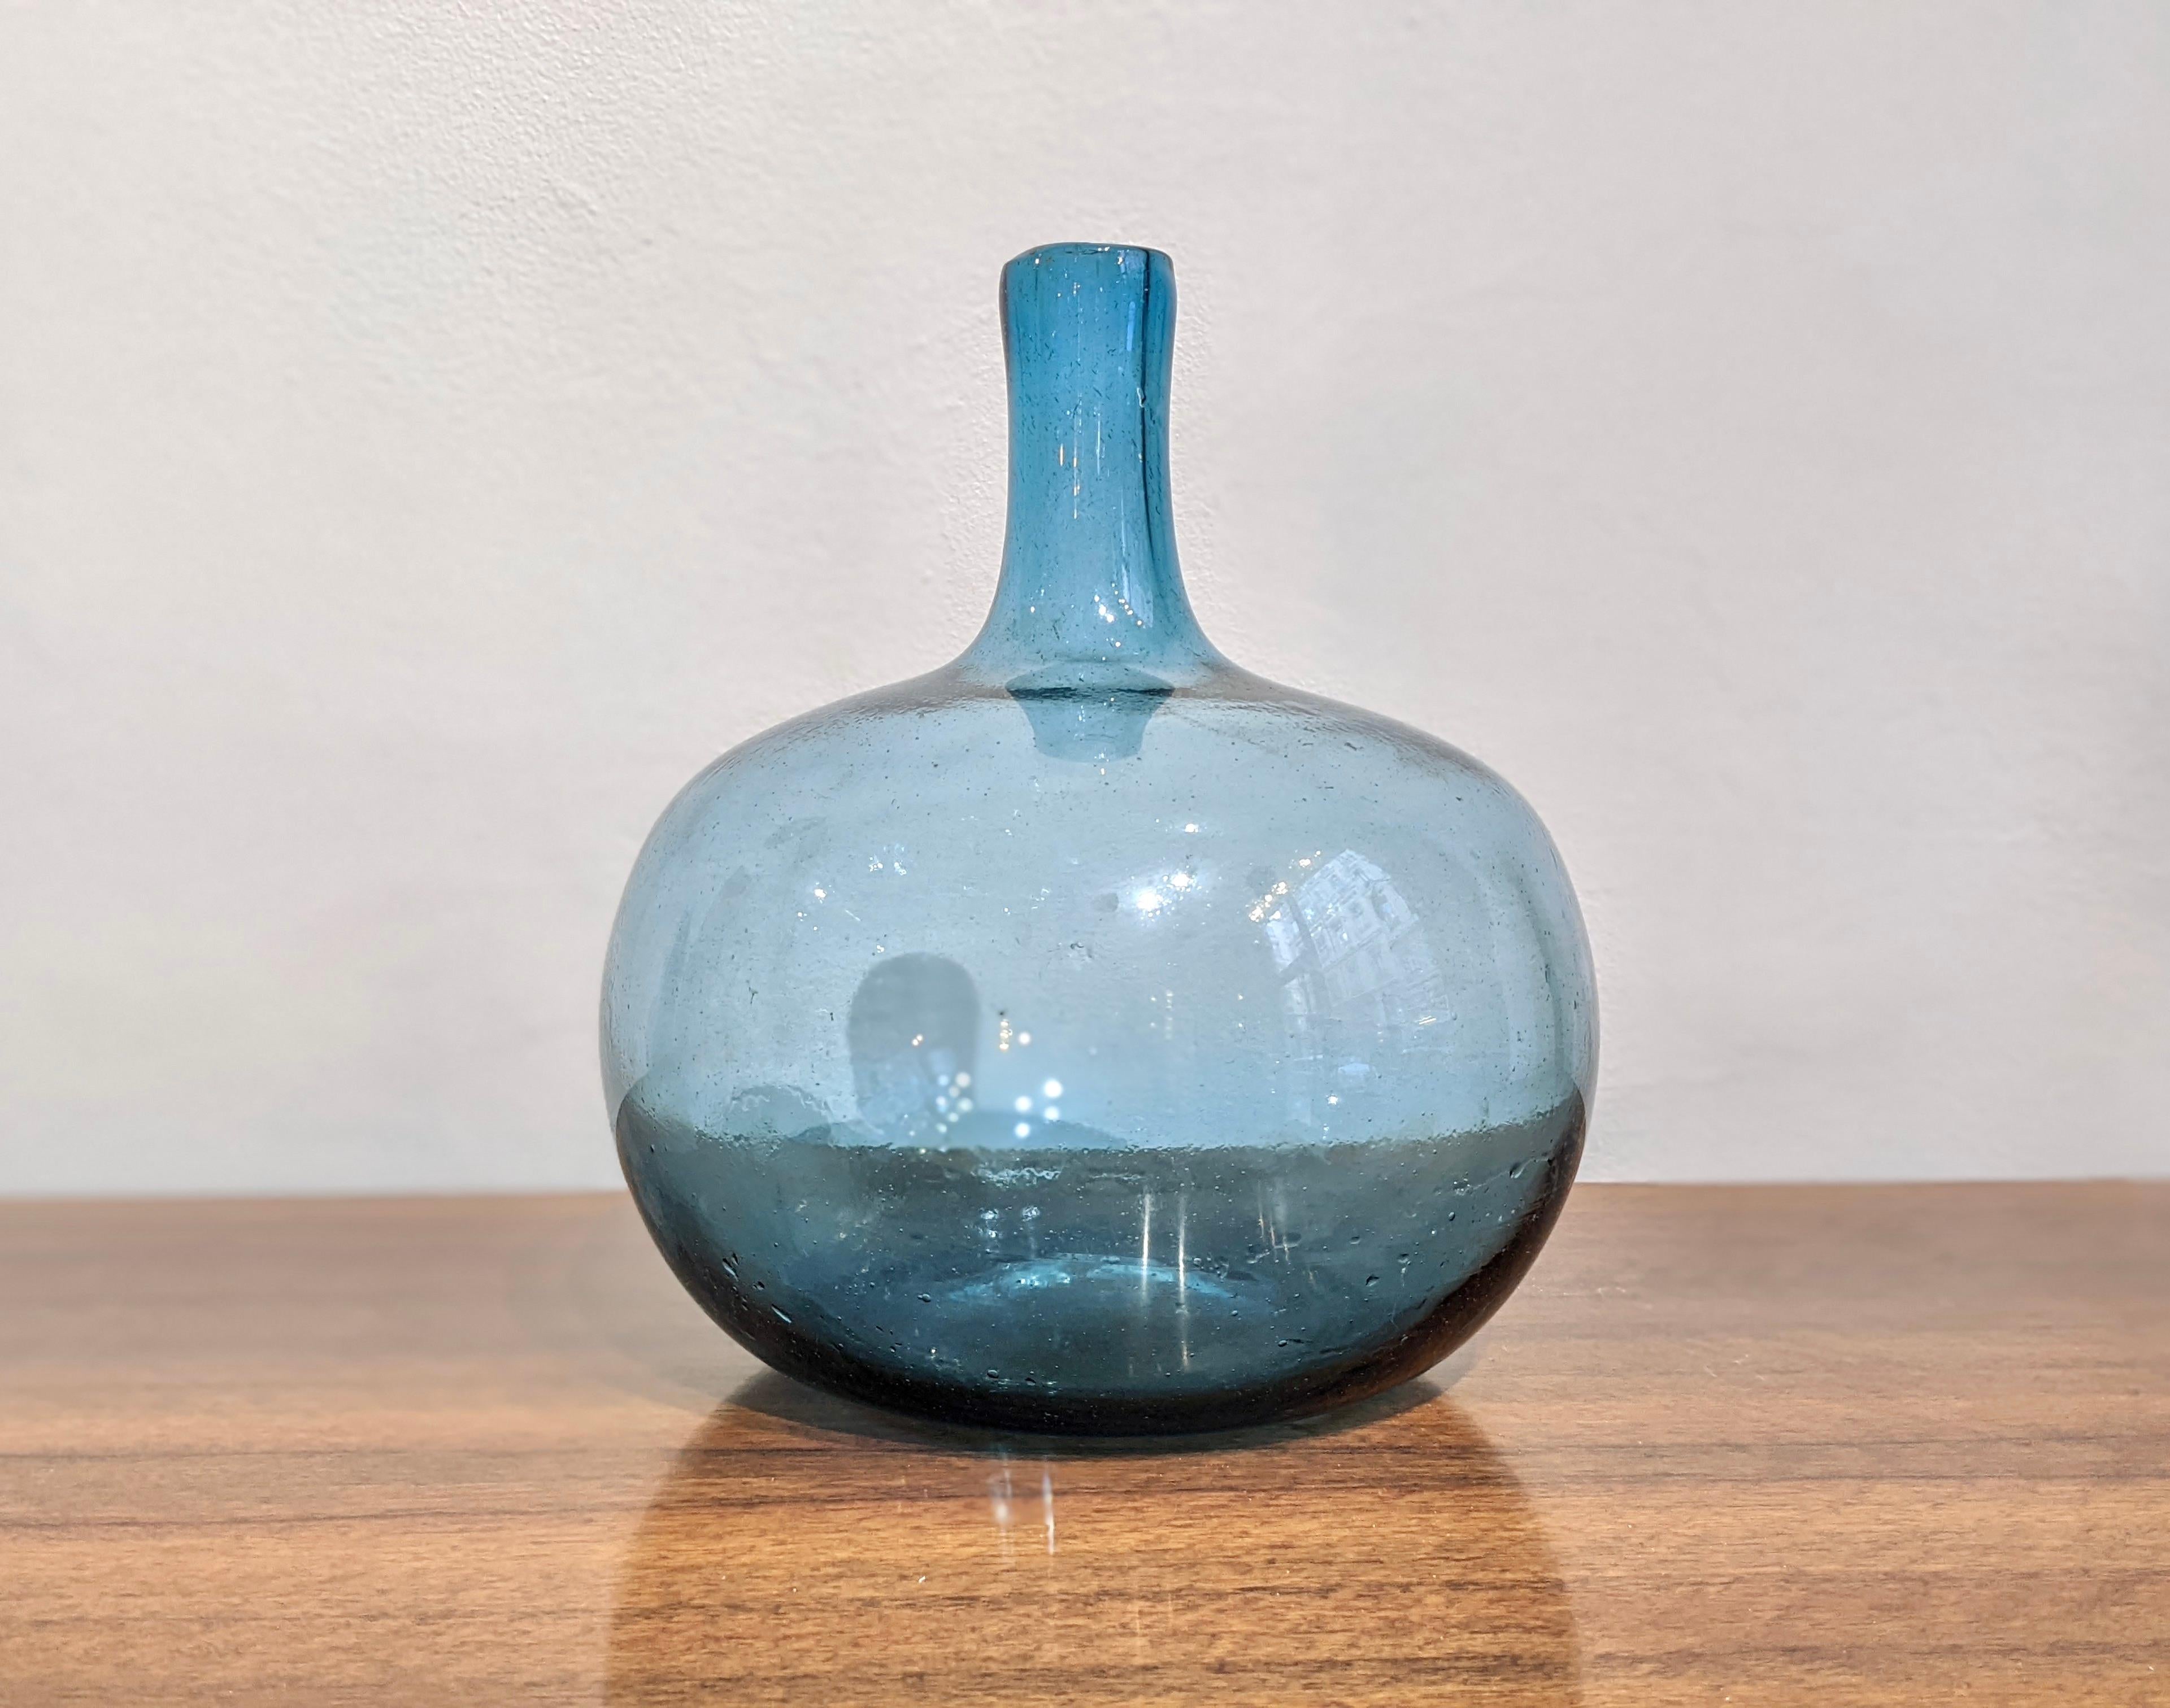 Blue glass vase, Claude Morin
Good condition. France, circa 1960.
Glass vase from the Dieulefit workshops by Claude Morin.
Signed underneath 